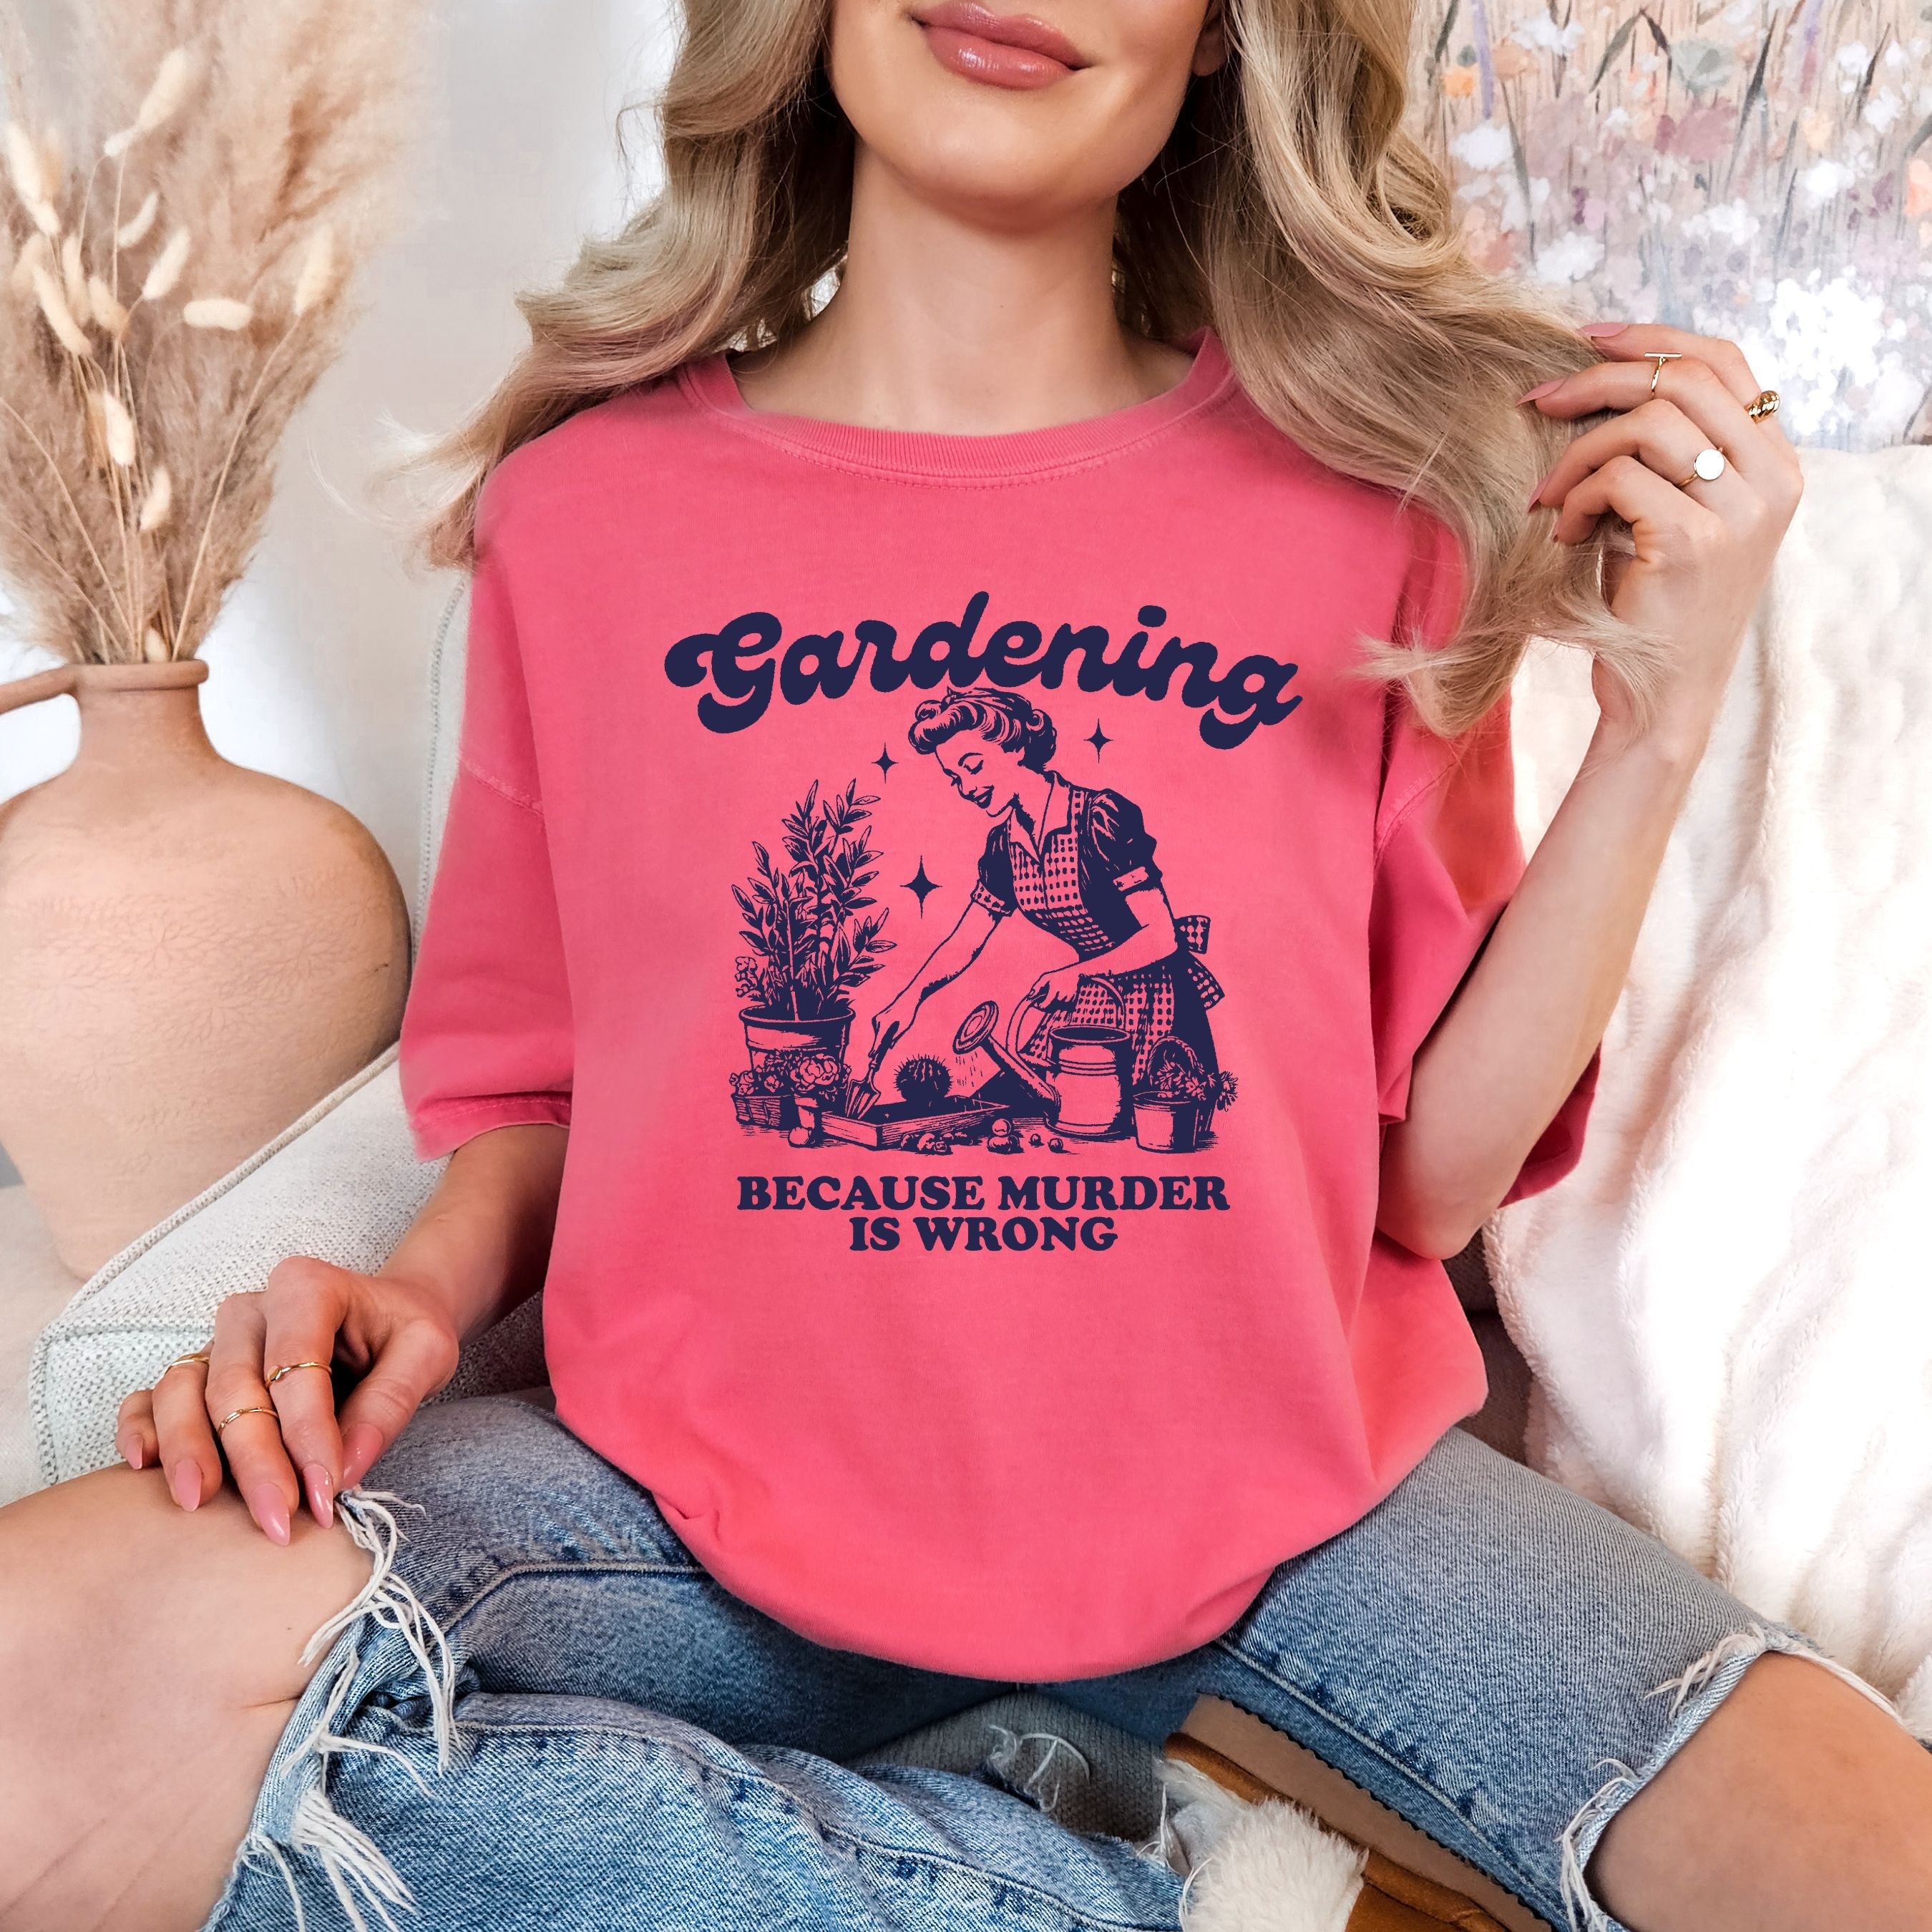 PREORDER: Gardening Because Graphic Tee (Ships Late May)